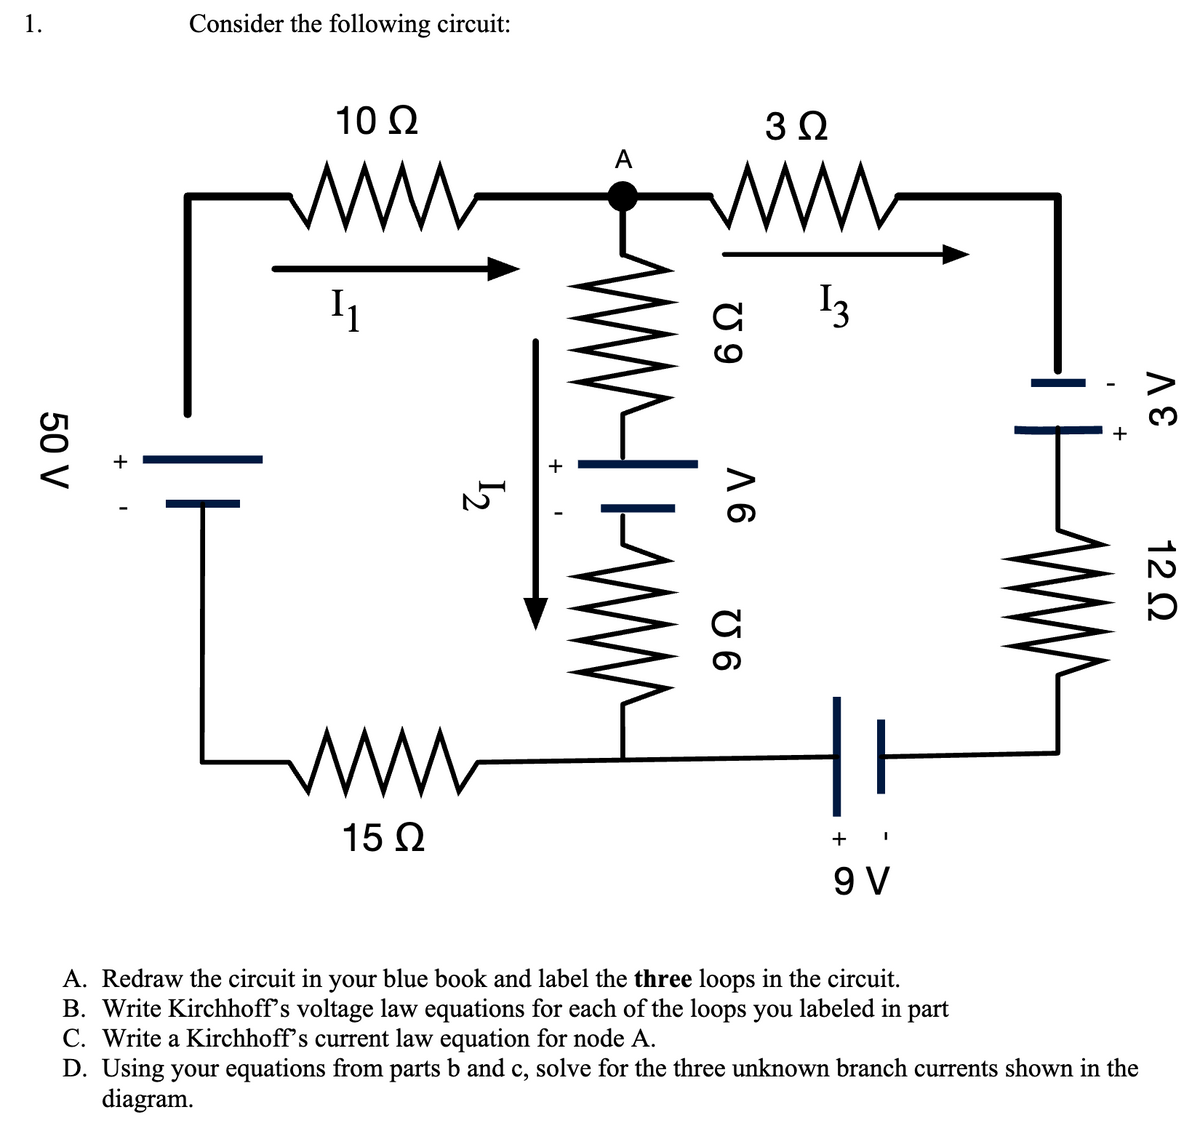 1.
50 V
Consider the following circuit:
10 Q2
www
I₁
ww
15 Ω
12
W
+
A
ww
U9
WWW.
9 V
U 6
3Q
13
+
9 V
I
A. Redraw the circuit in your blue book and label the three loops in the circuit.
B. Write Kirchhoff's voltage law equations for each of the loops you labeled in part
C. Write a Kirchhoff's current law equation for node A.
D. Using your equations from parts b and c, solve for the three unknown branch currents shown in the
diagram.
3 V
12 Q2